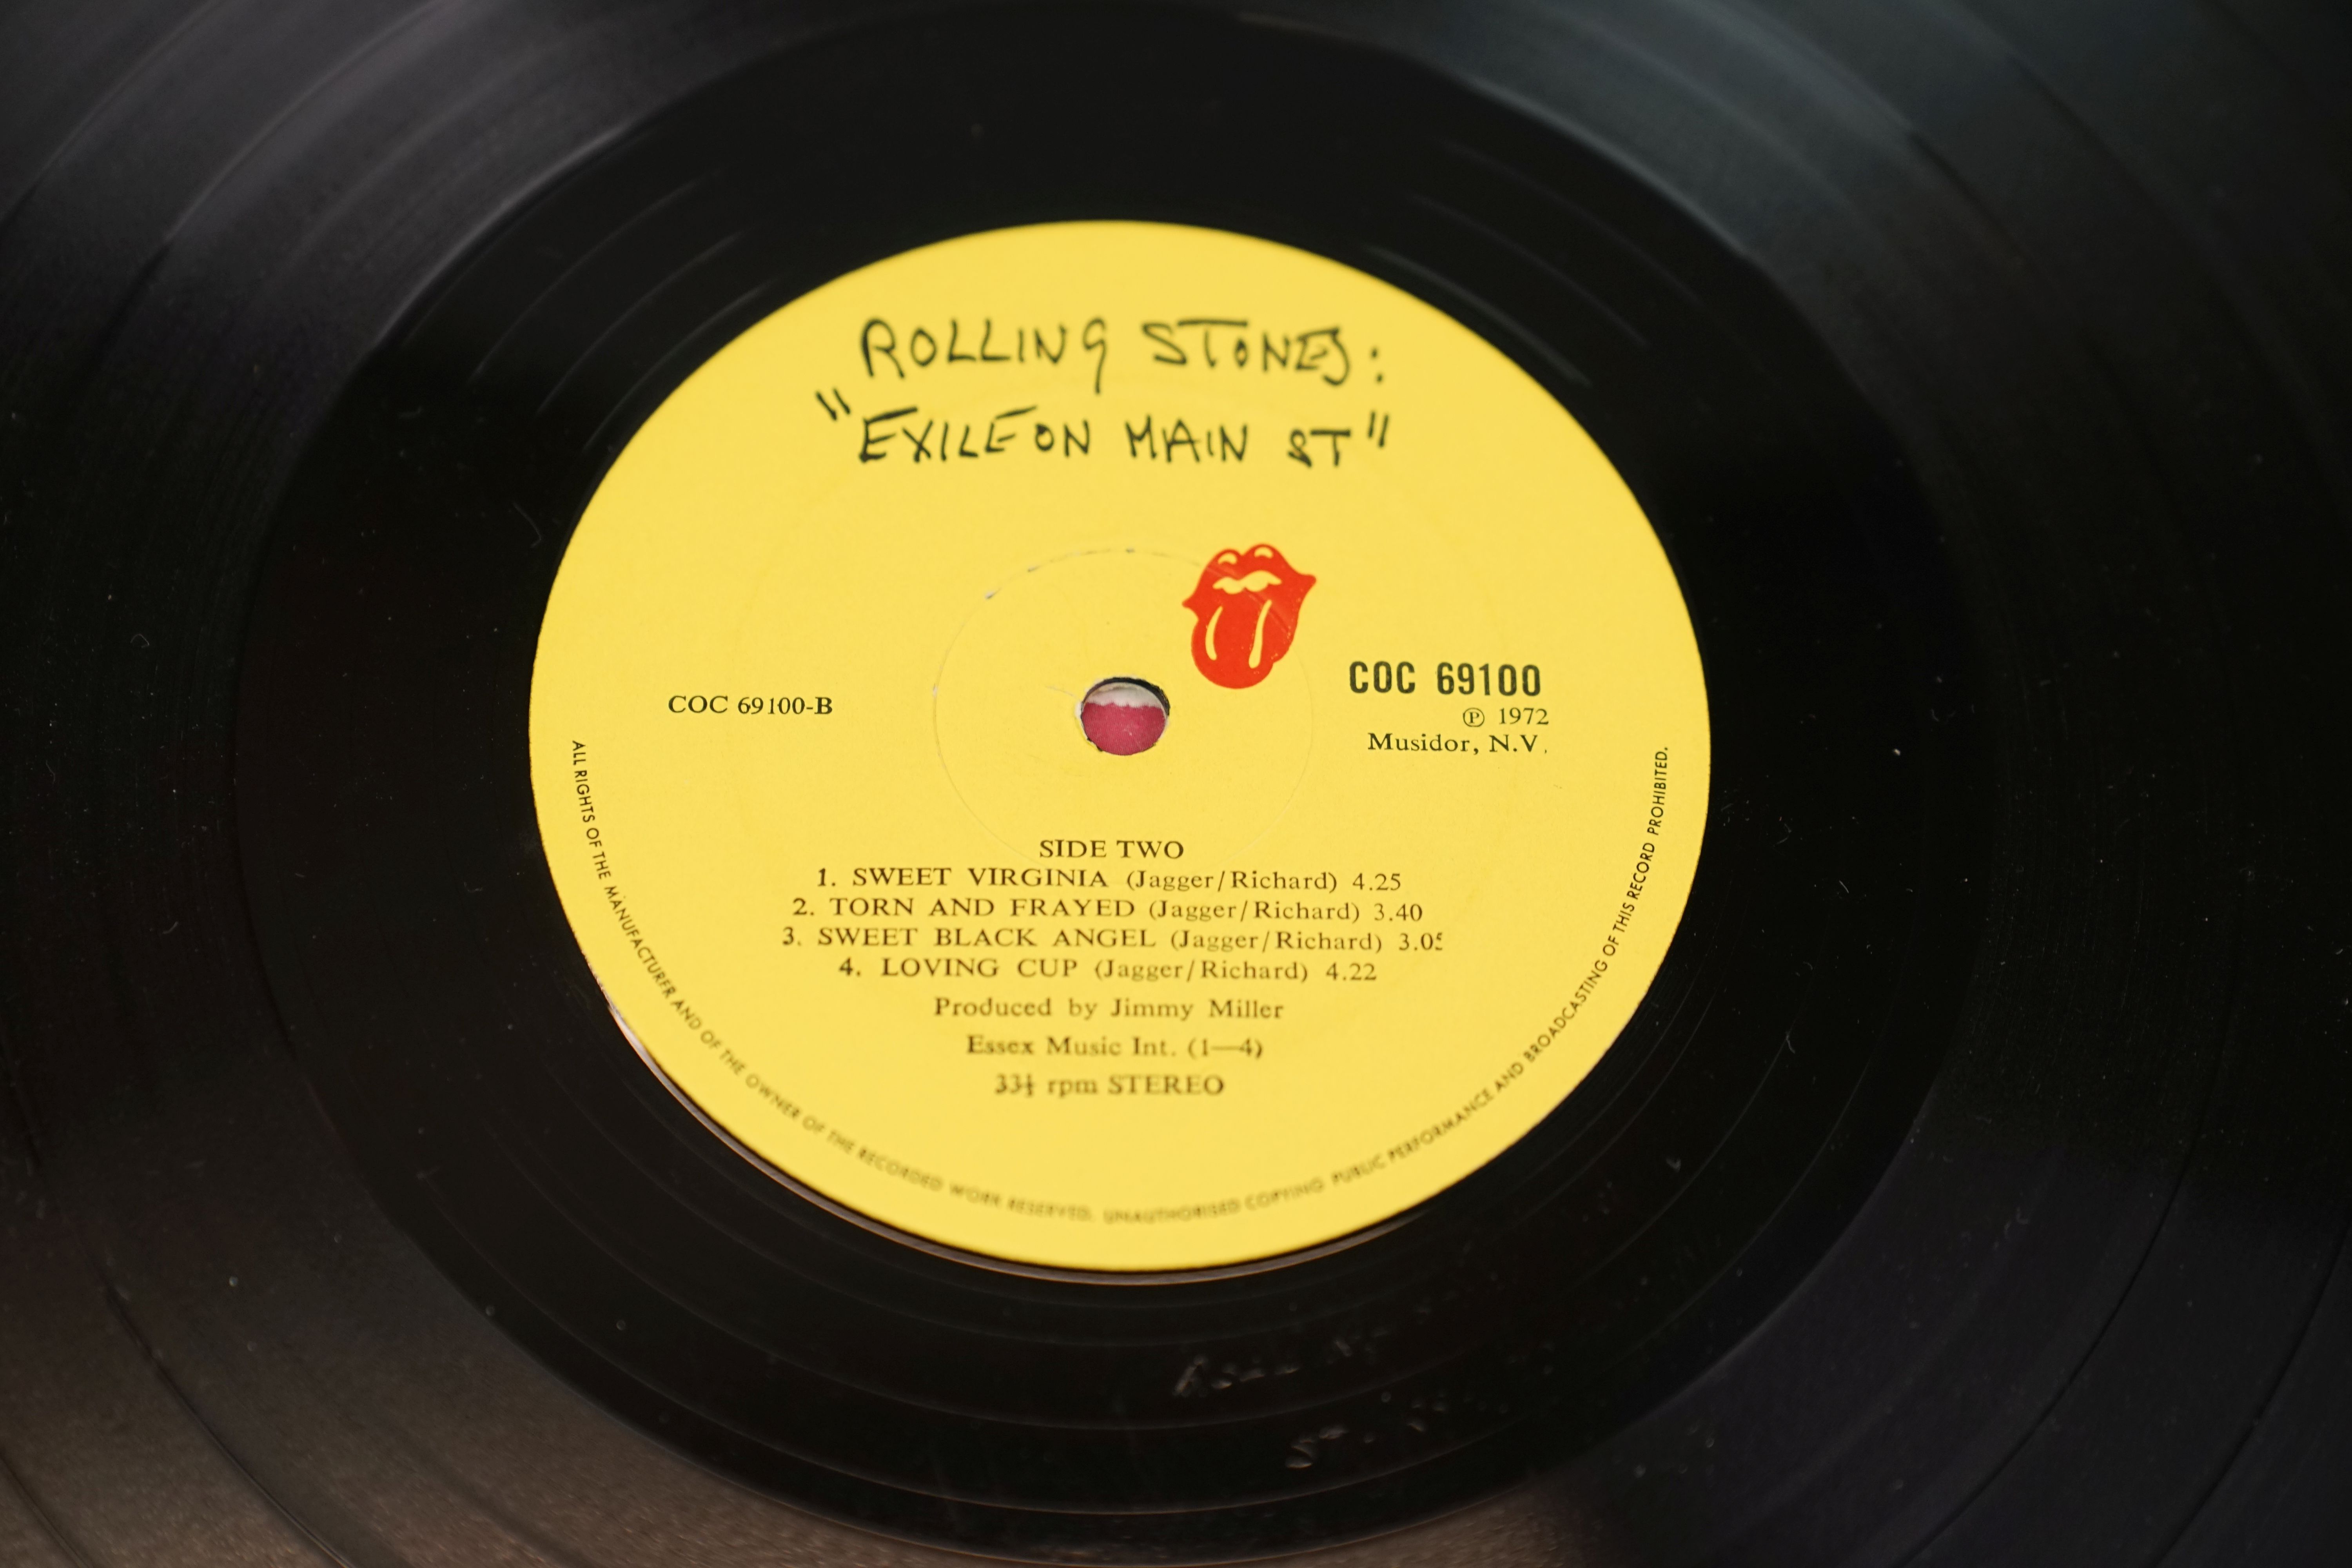 Vinyl - the Rolling Stones Exile on Main Street, no postcards, vinyl and sleeves vg - Image 11 of 16